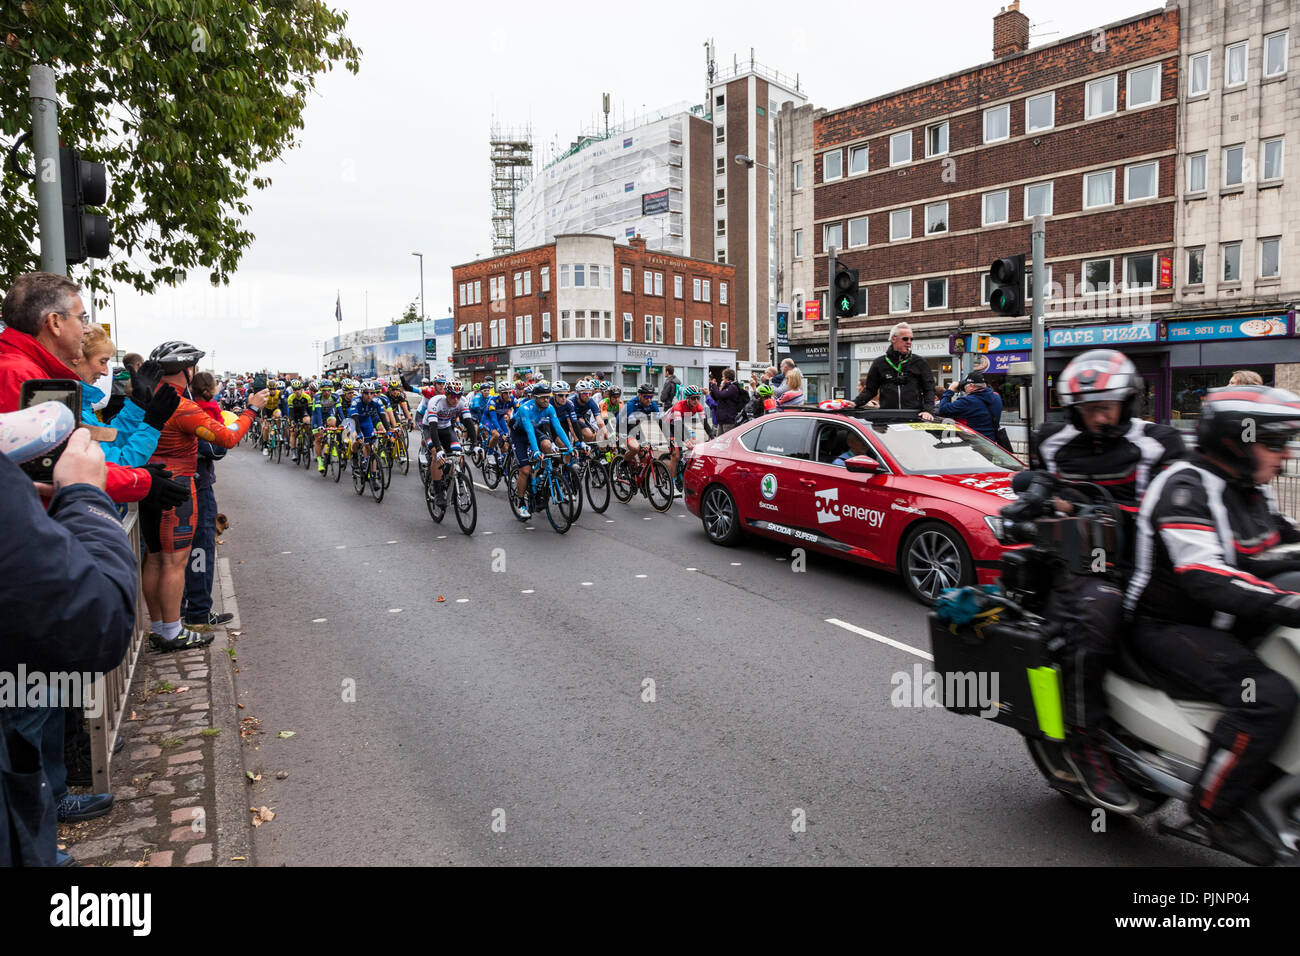 West Bridgford, Nottingham, UK 8th September 2018. Spectators watch and photograph as the Tour of Britain cycle race passes over Trent Bridge in West Bridgford, Nottingham.  Credit: Martyn Williams/Alamy Live News Stock Photo